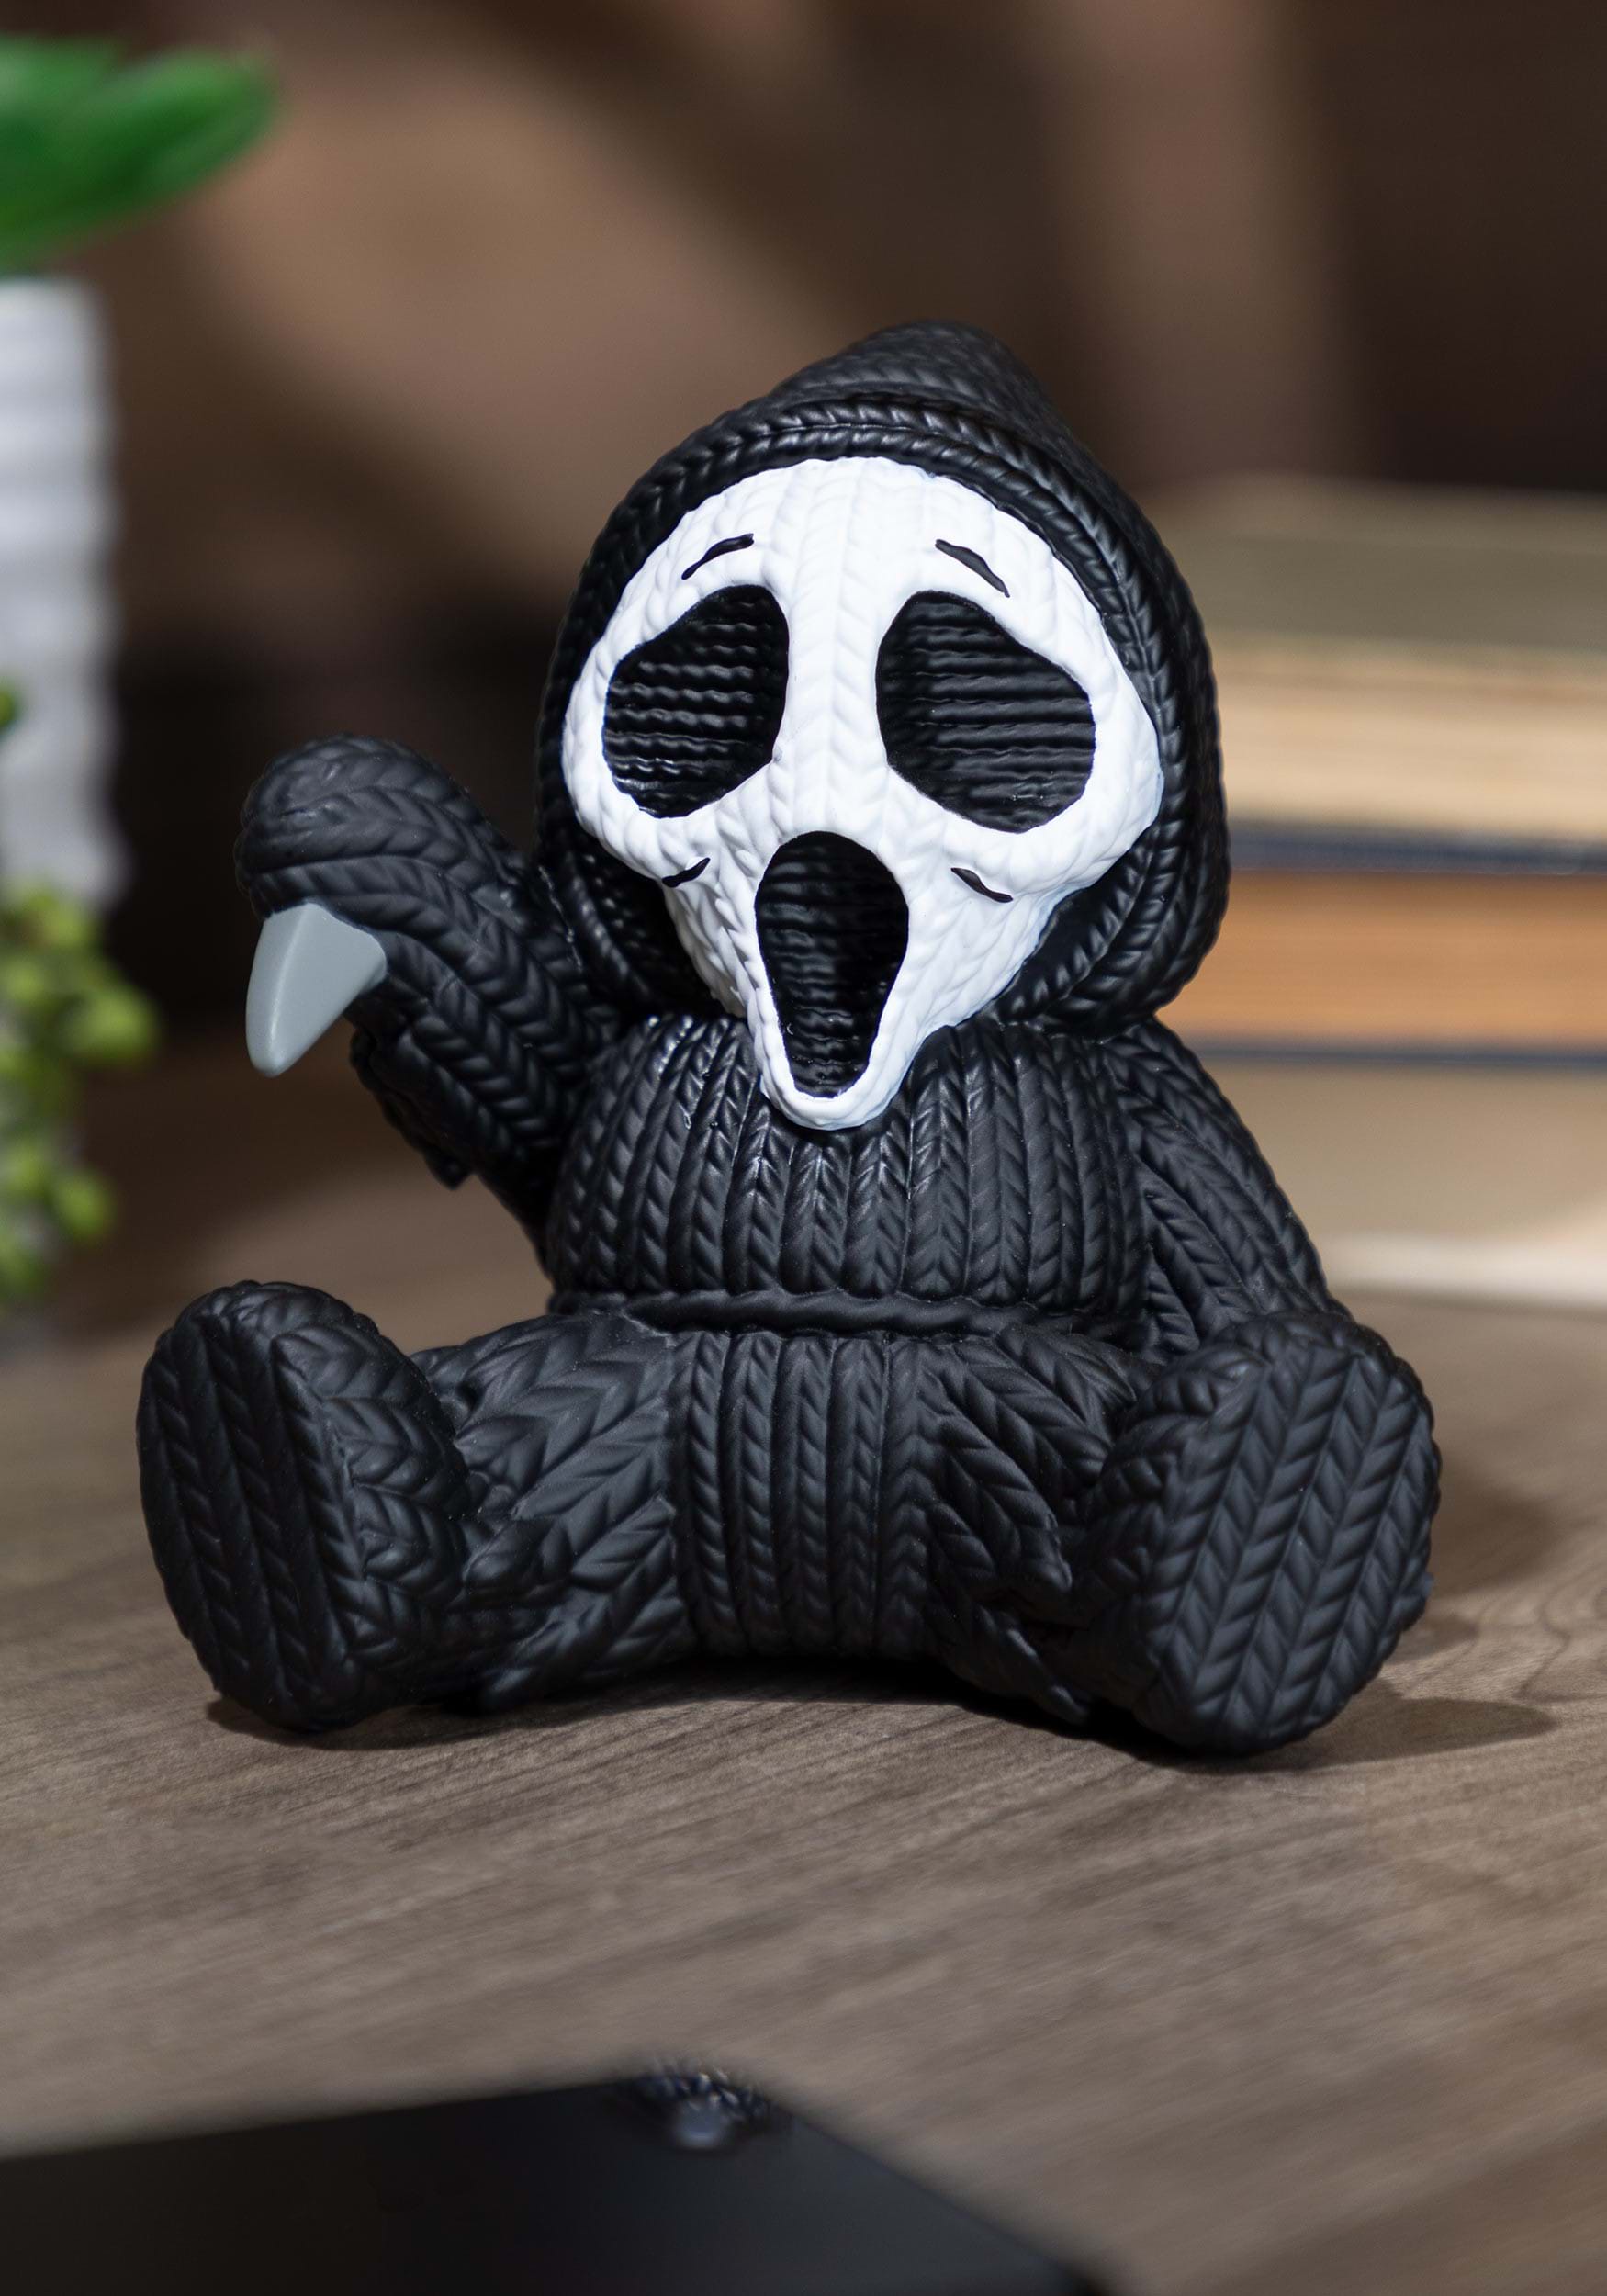 https://images.fun.com/products/76370/1-1/ghost-face-handmade-by-robots-vinyl-figure.jpg